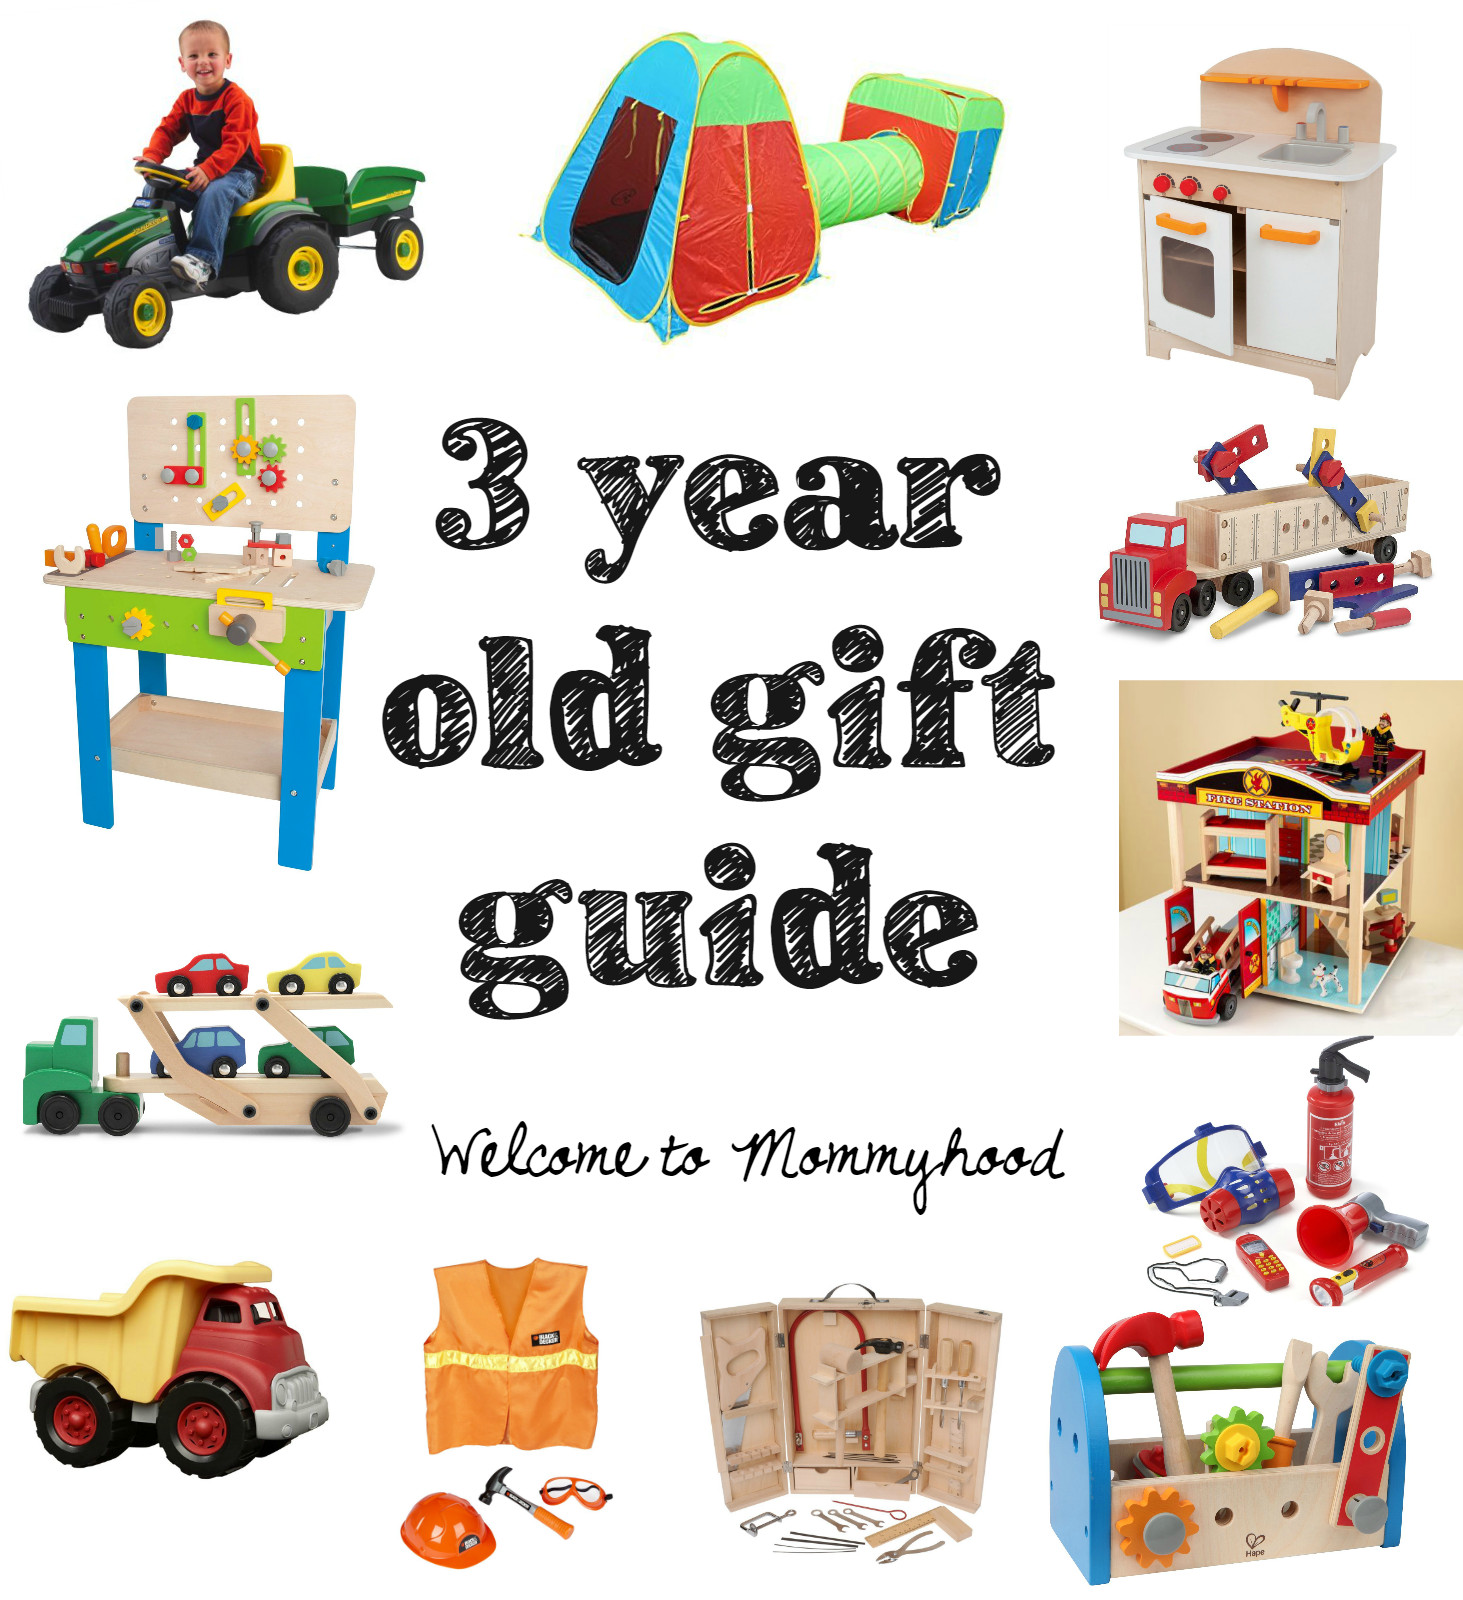 Great Gift Ideas For 3 Year Old Boys
 Gift guide for three year old boys from Wel e to